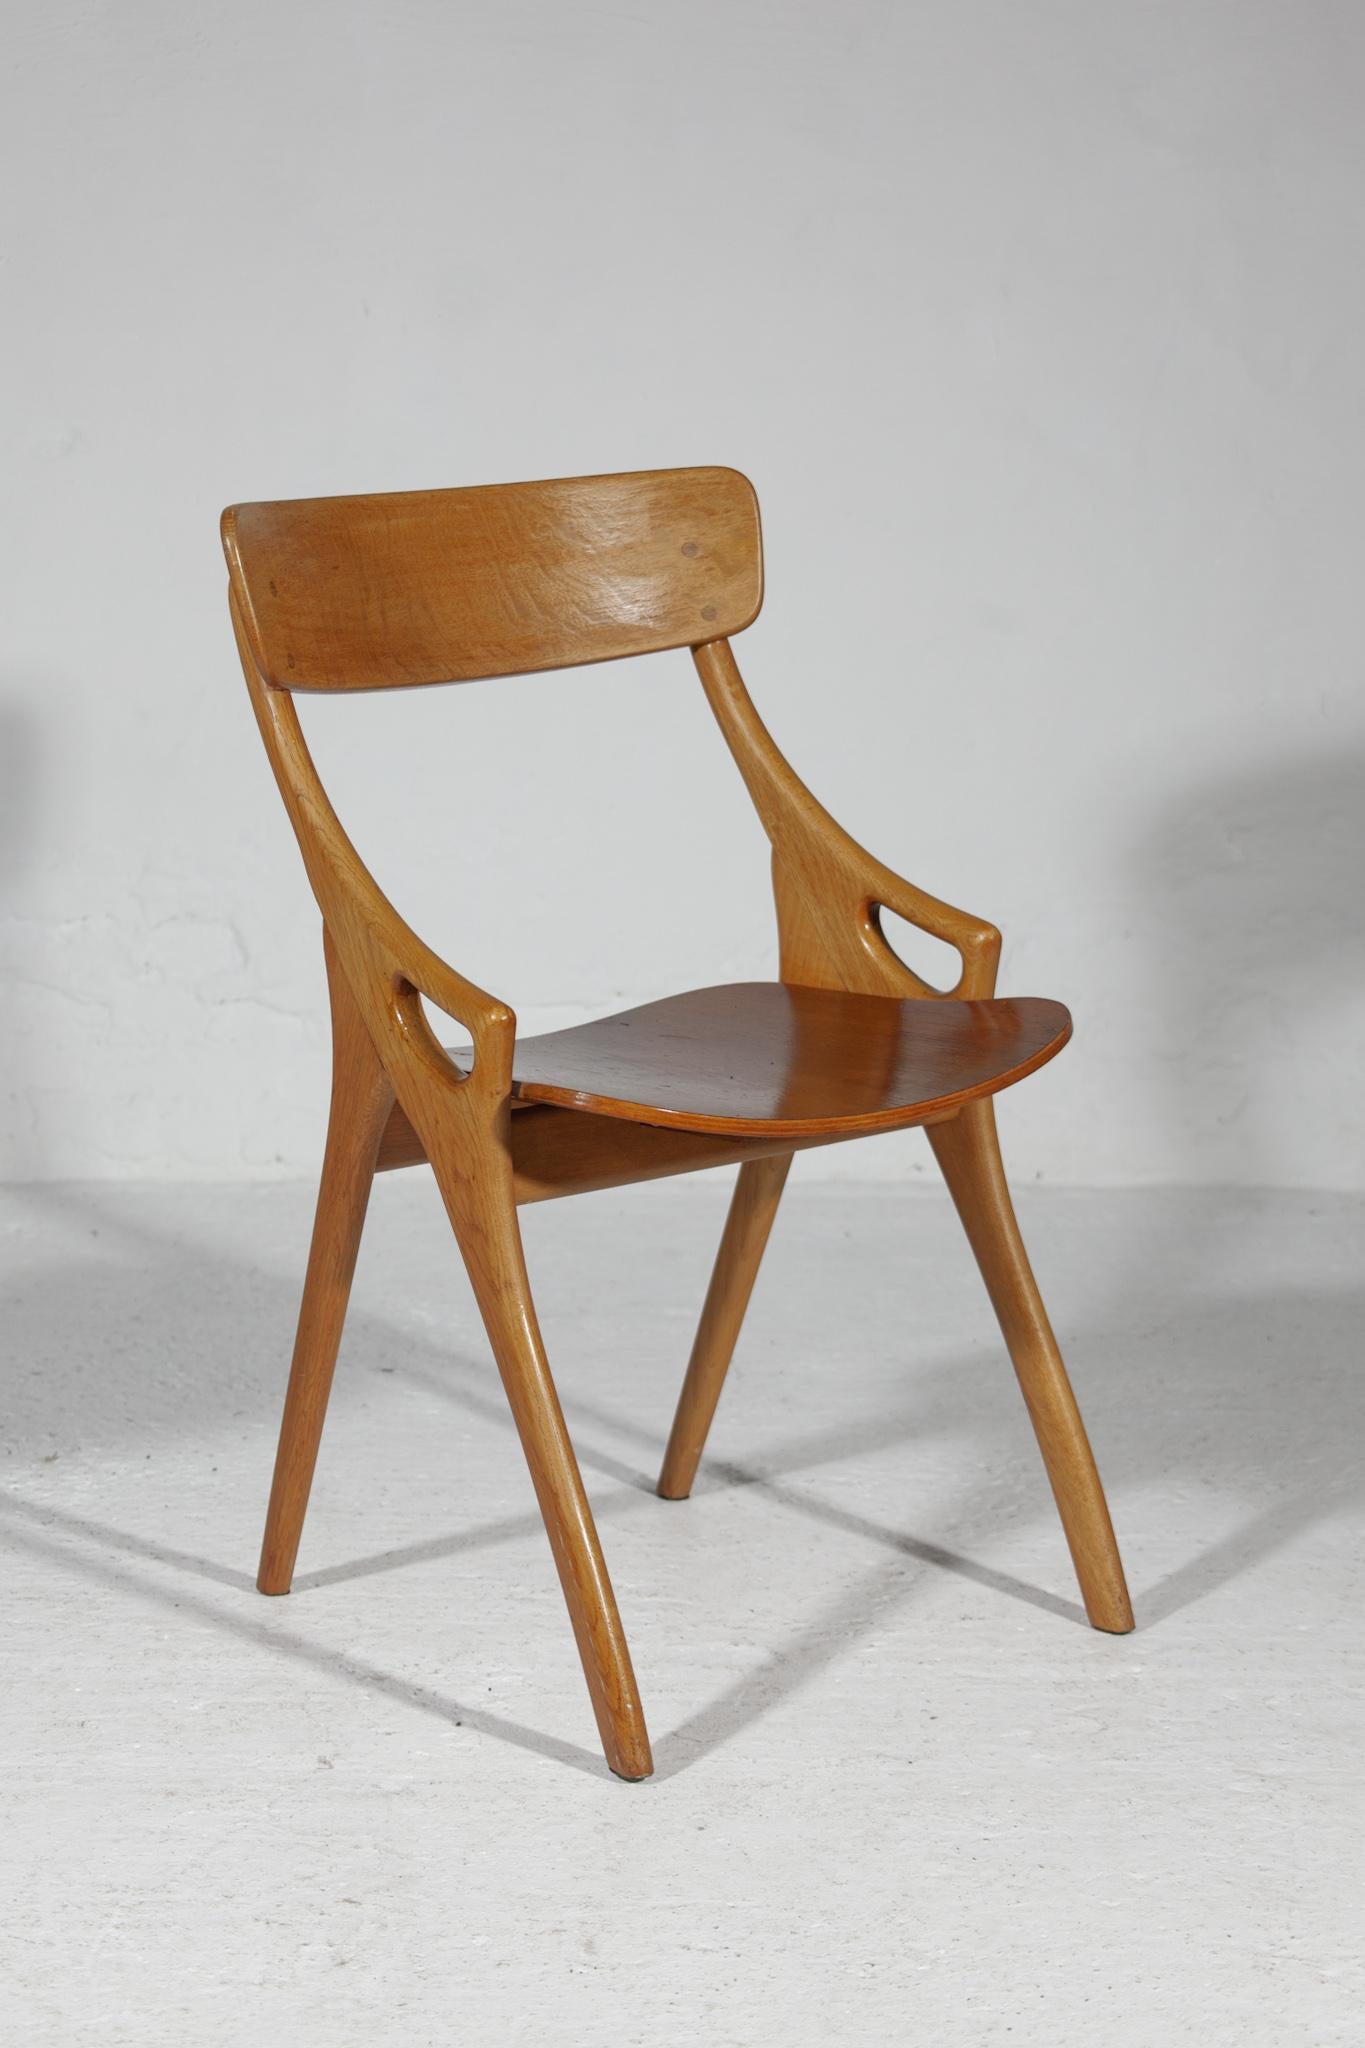 Vintage rare set of four dining-room chairs, designed by Arne Hovmand Olsen for Mogens Kold Mobelfabrik, Denmark.The chairs are organic in their shape the rounded, almost branch like legs and the elegant open detail in the armrests. There are little